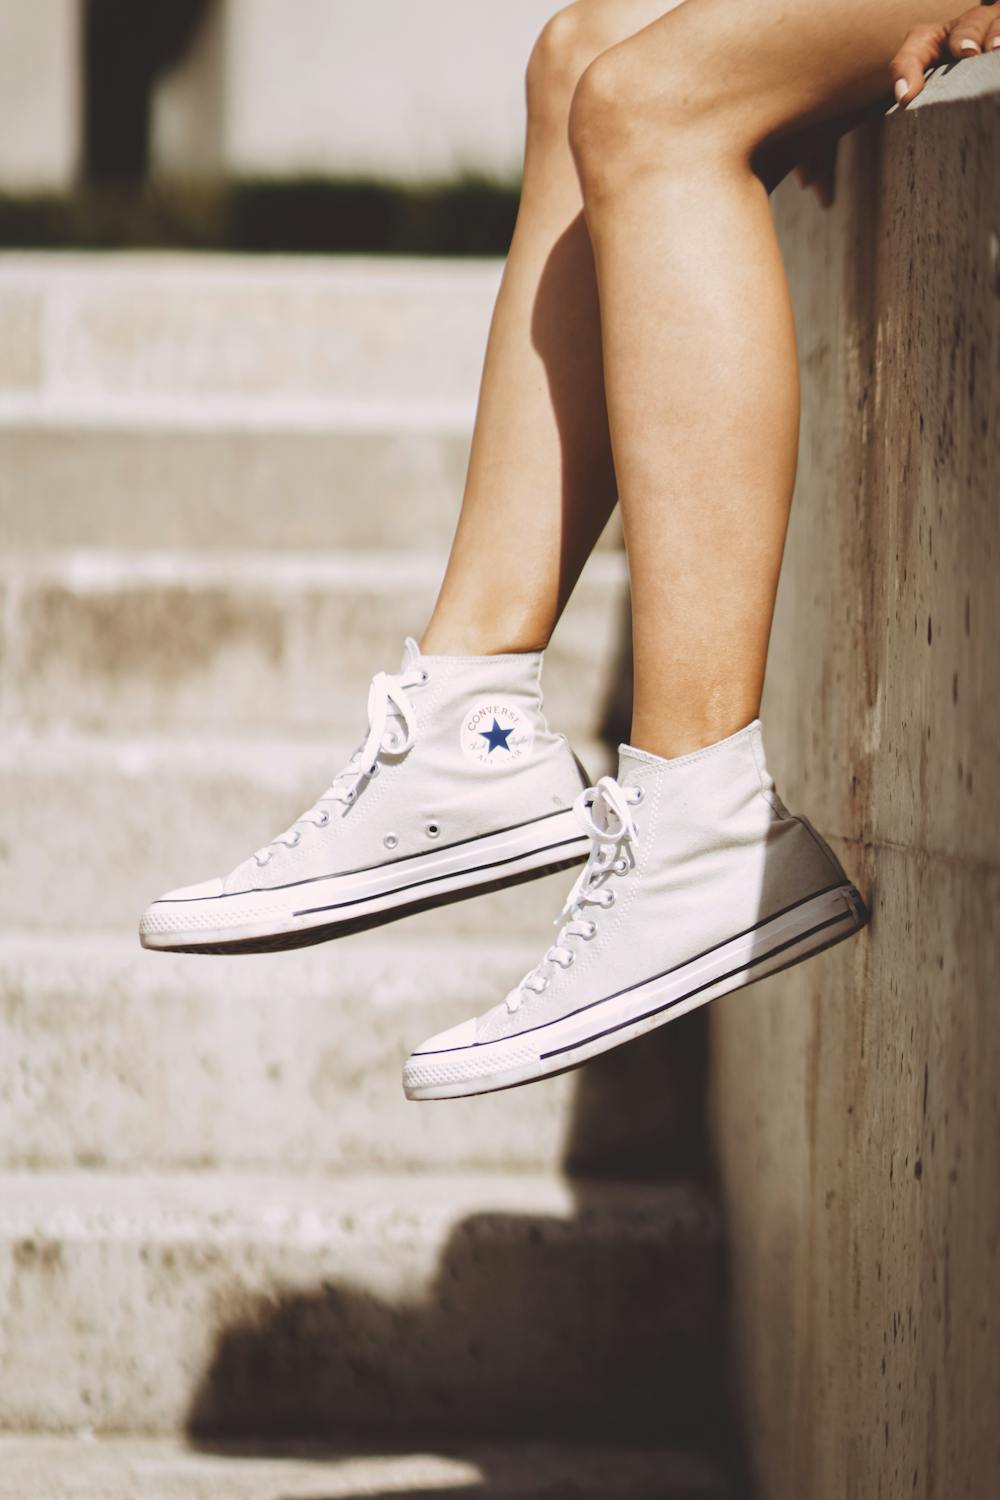 Woman Wearing White High-top Sneakers · Free Stock Photo